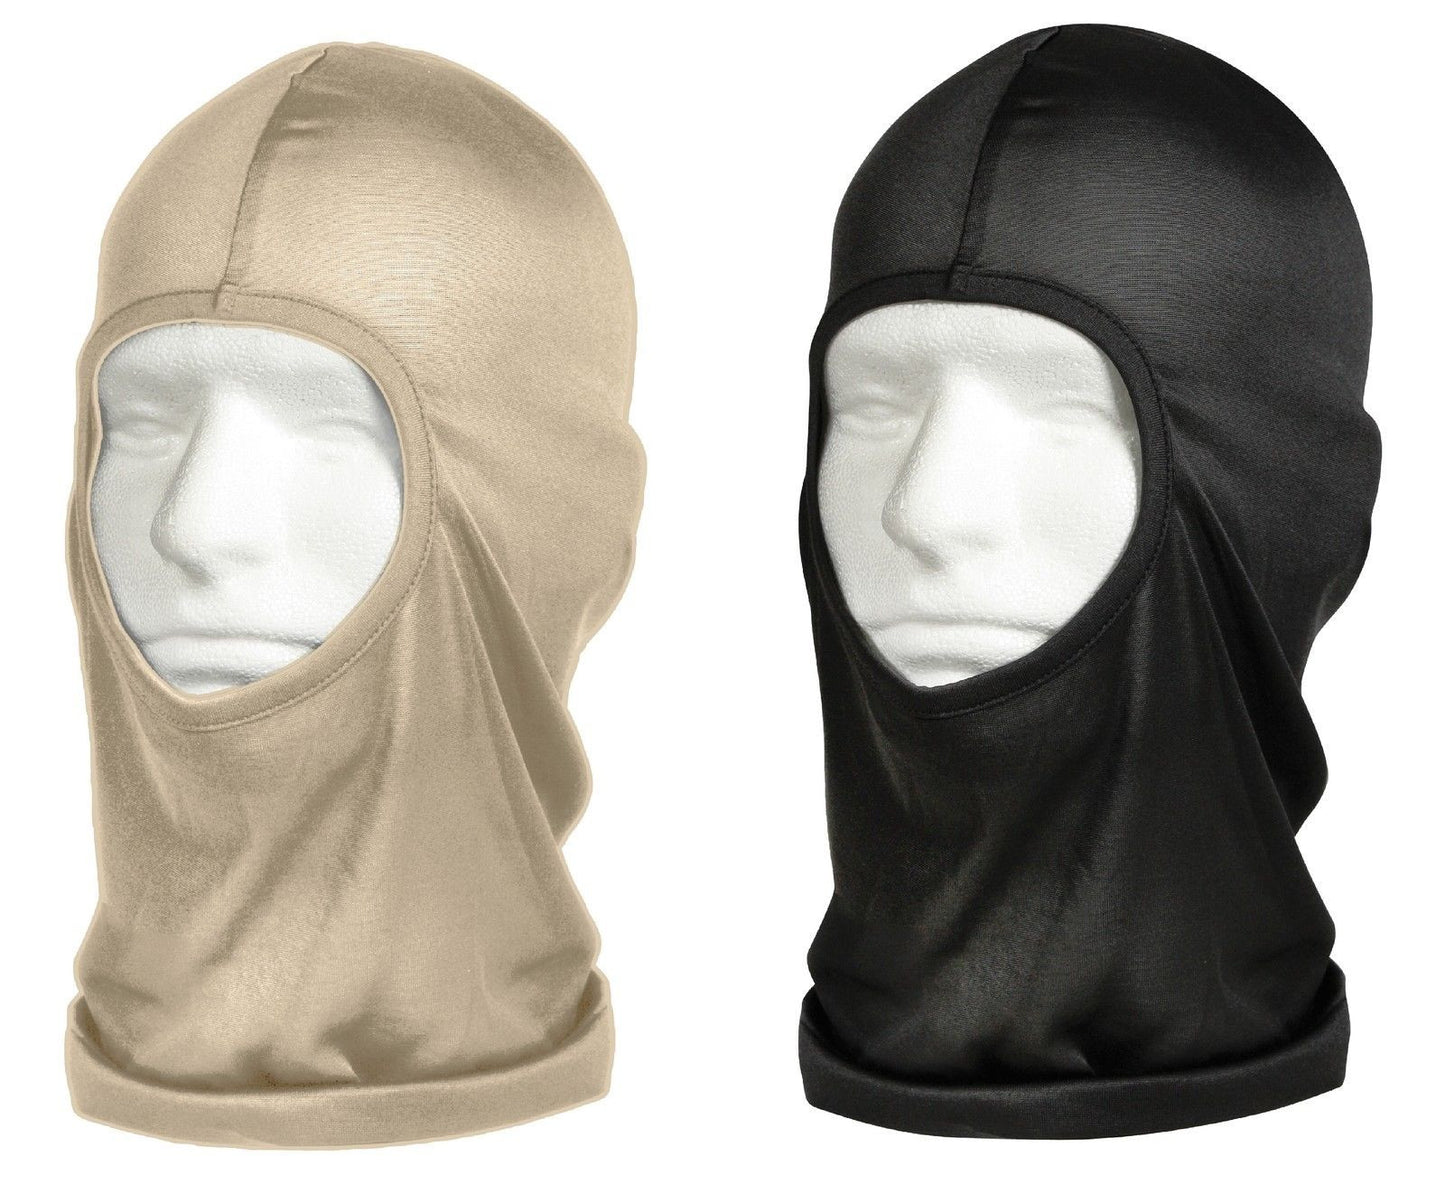 Lightweight Balaclava 100% Polyester Breathable Cold Winter Head & Neck Warmer